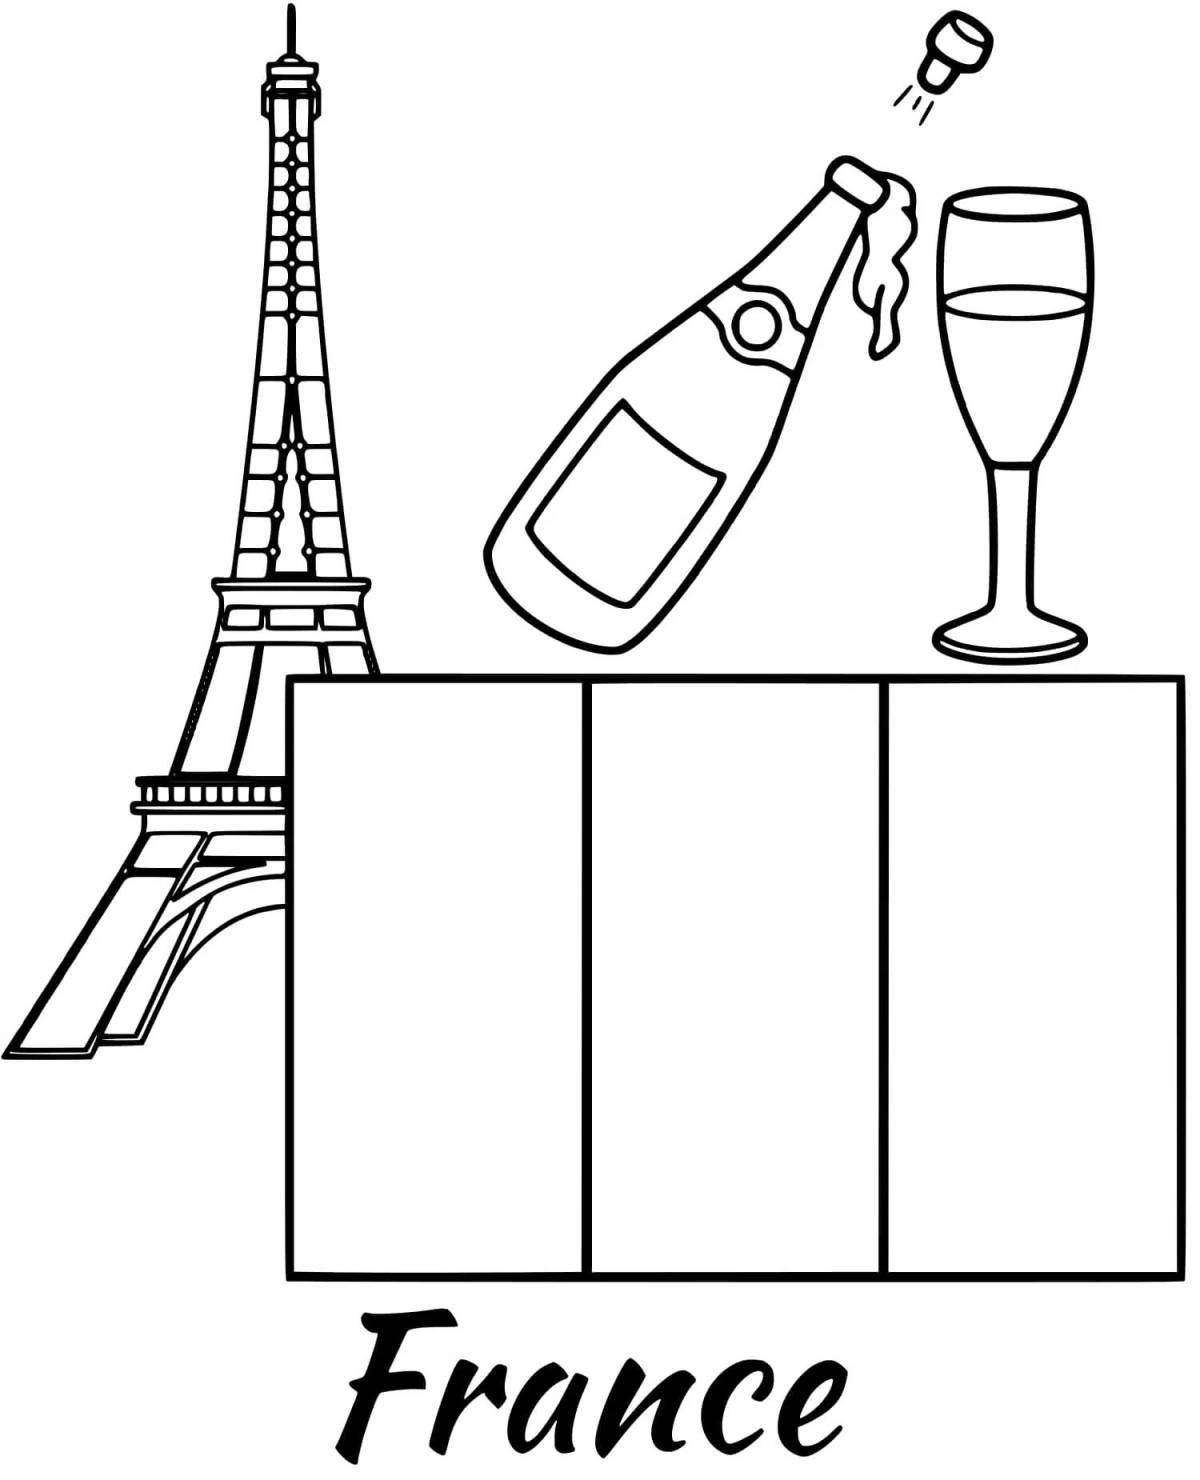 Colorfully rendered france flag coloring page